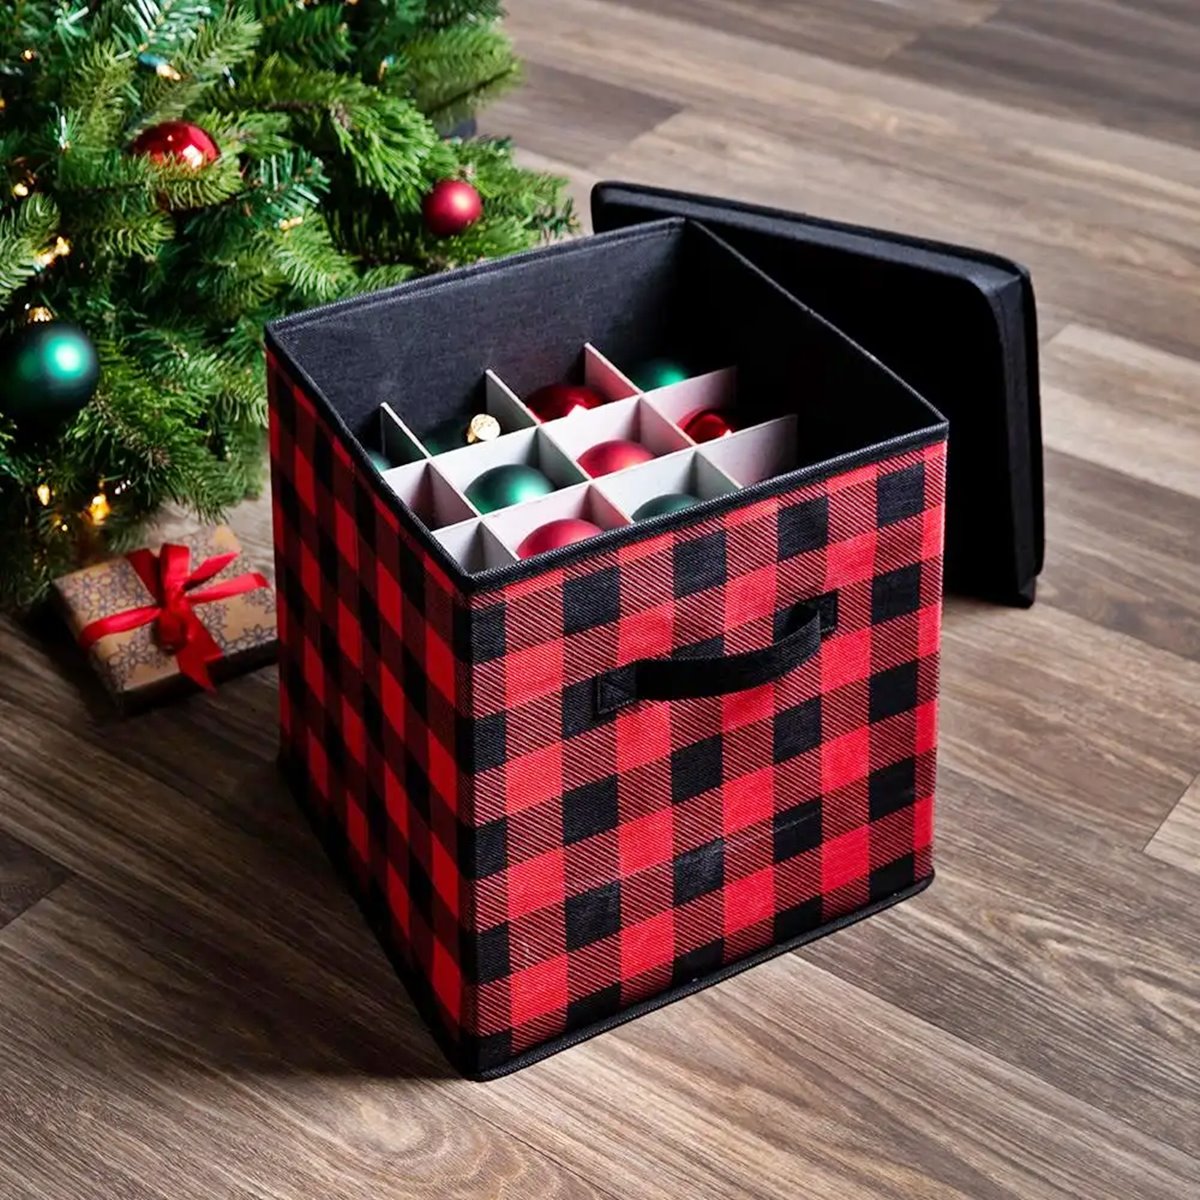 Christmas Ornament Storage Container - Box Stores Up to 48 – 6” Ornaments –  With 4 Individual Trays -Heavy Duty 600D Tear Resistant Material